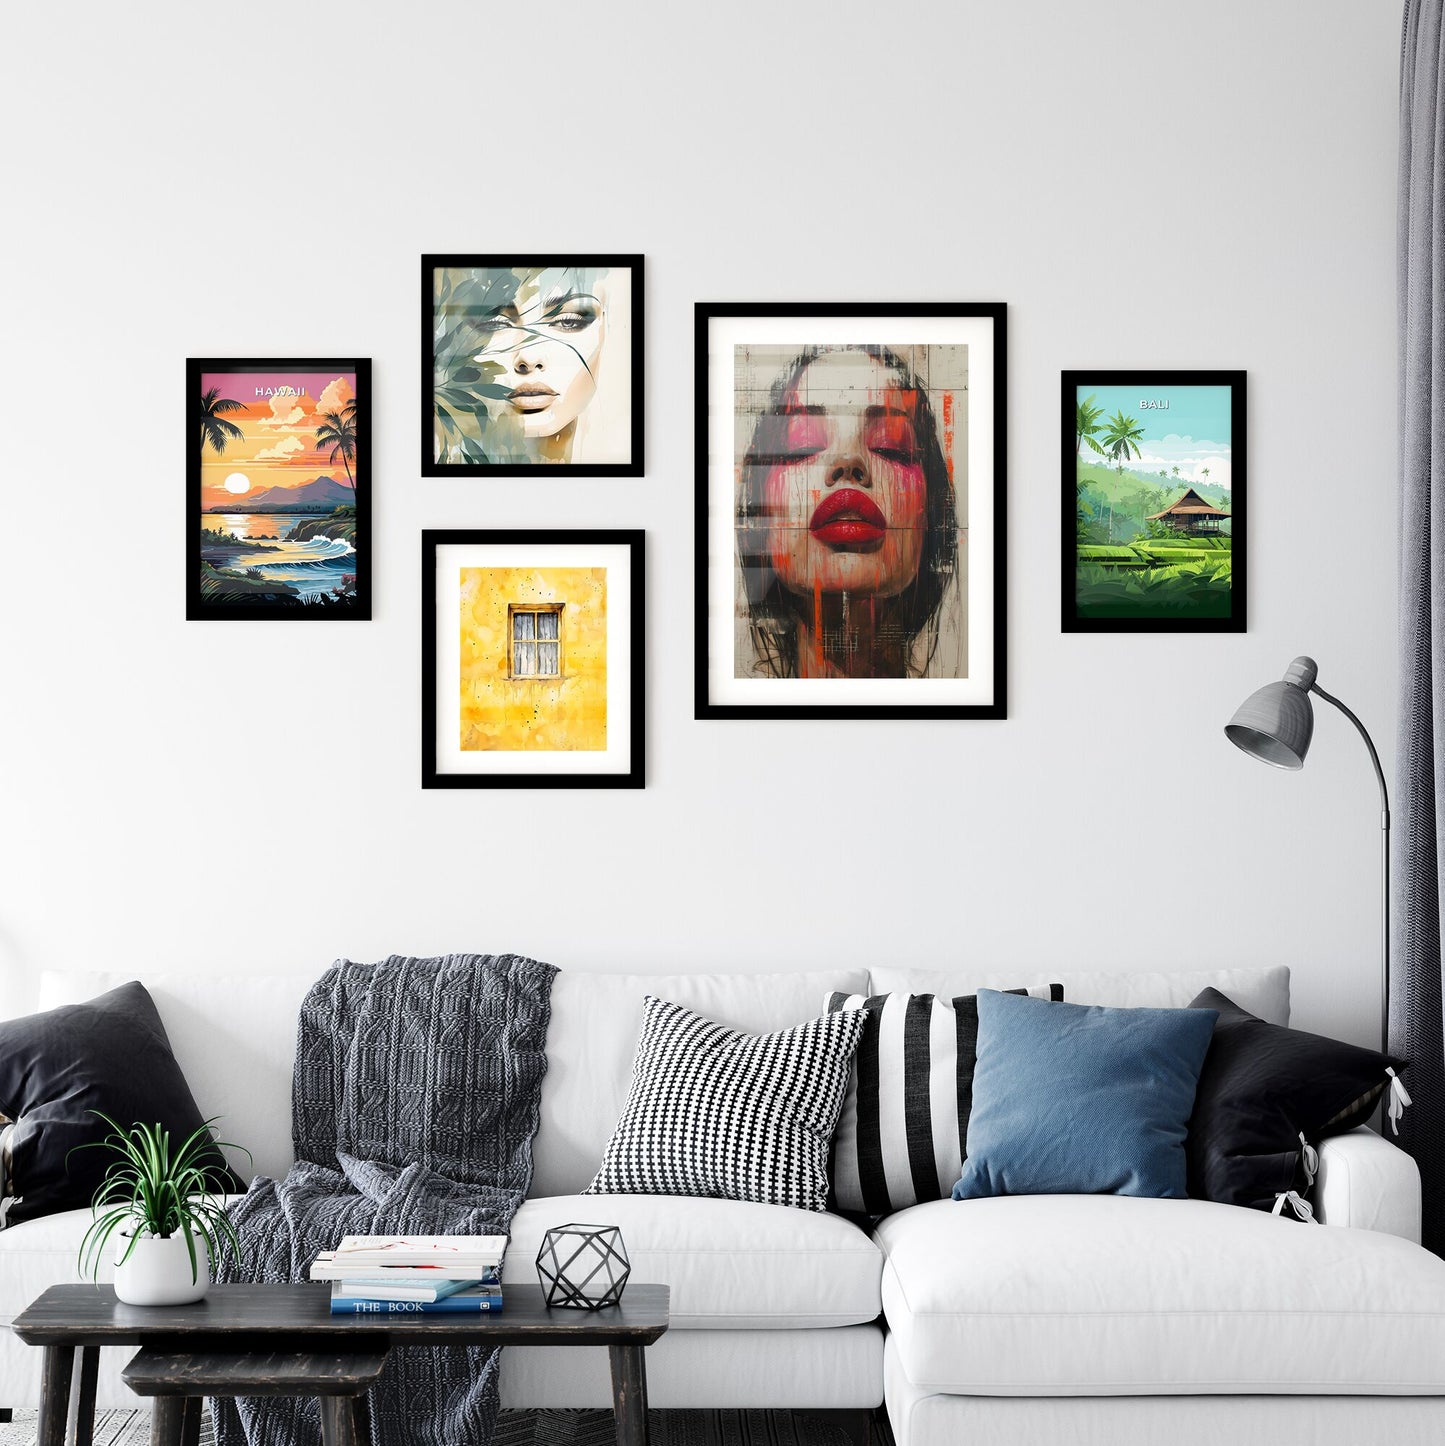 Vibrant red lips pop - Art print of a painting of a woman with red lipstick Default Title